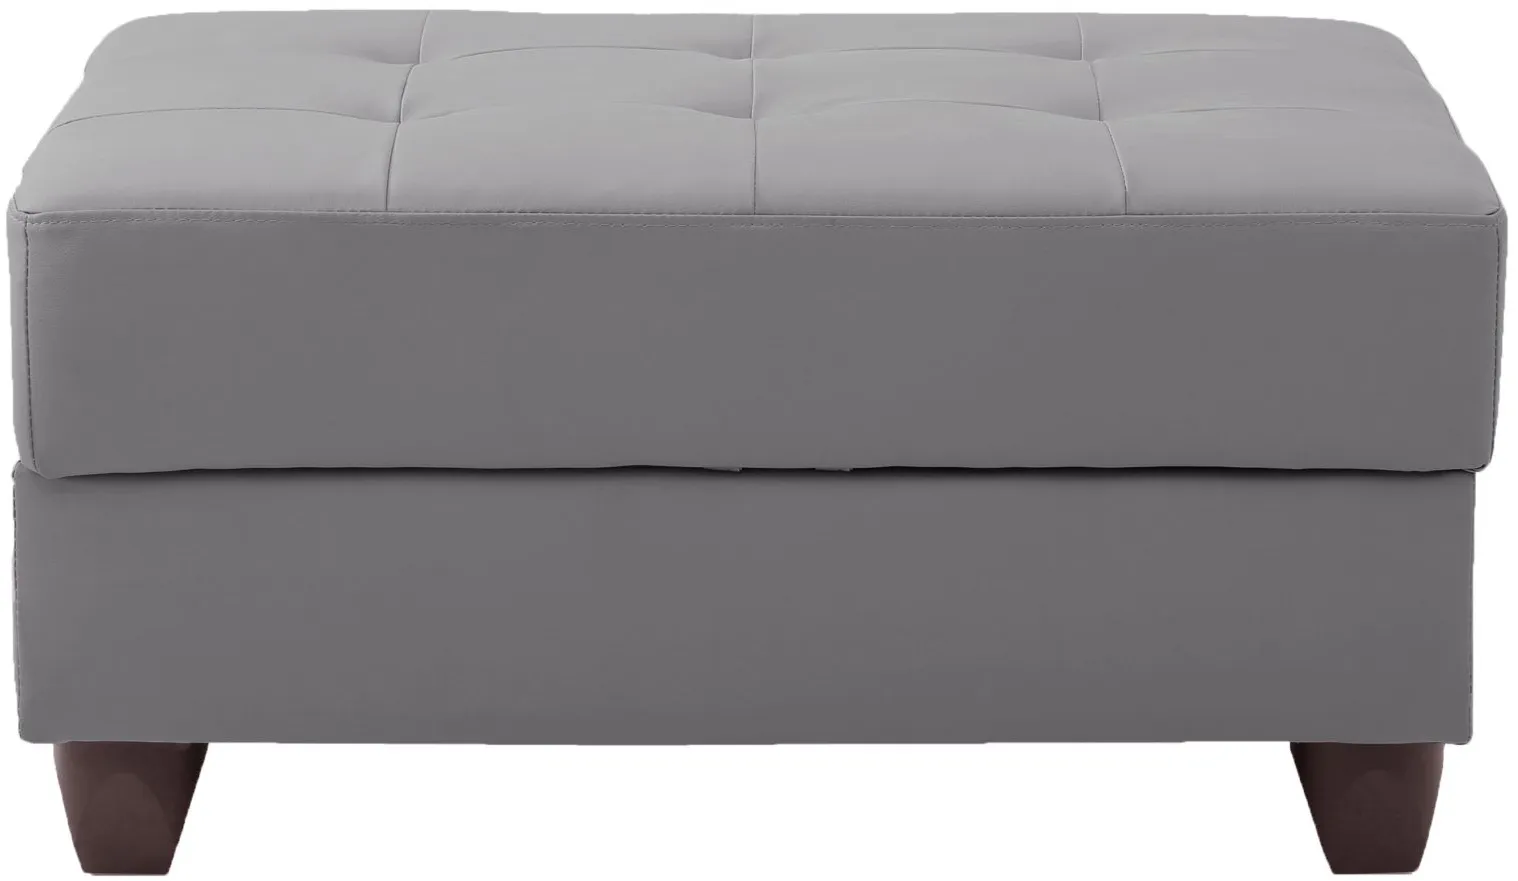 Malone Faux Leather Ottoman in Gray by Glory Furniture